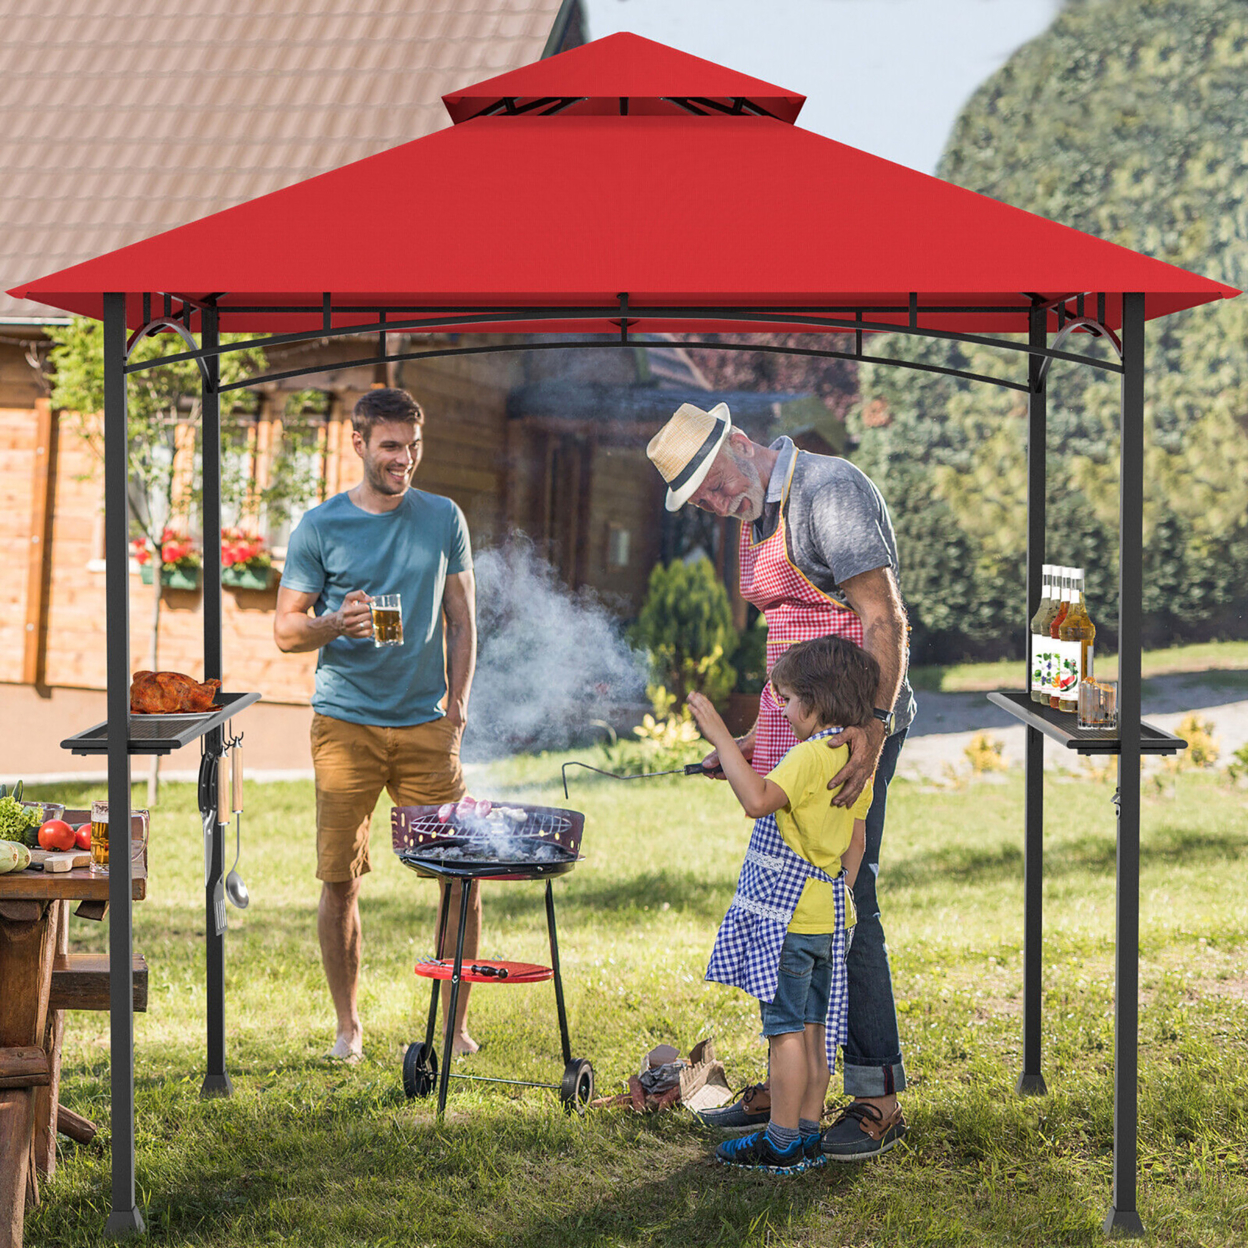 8' X 5' BBQ Grill Gazebo 2-Tier Barbecue Canopy Vented Top Shelves Shelter - Wine